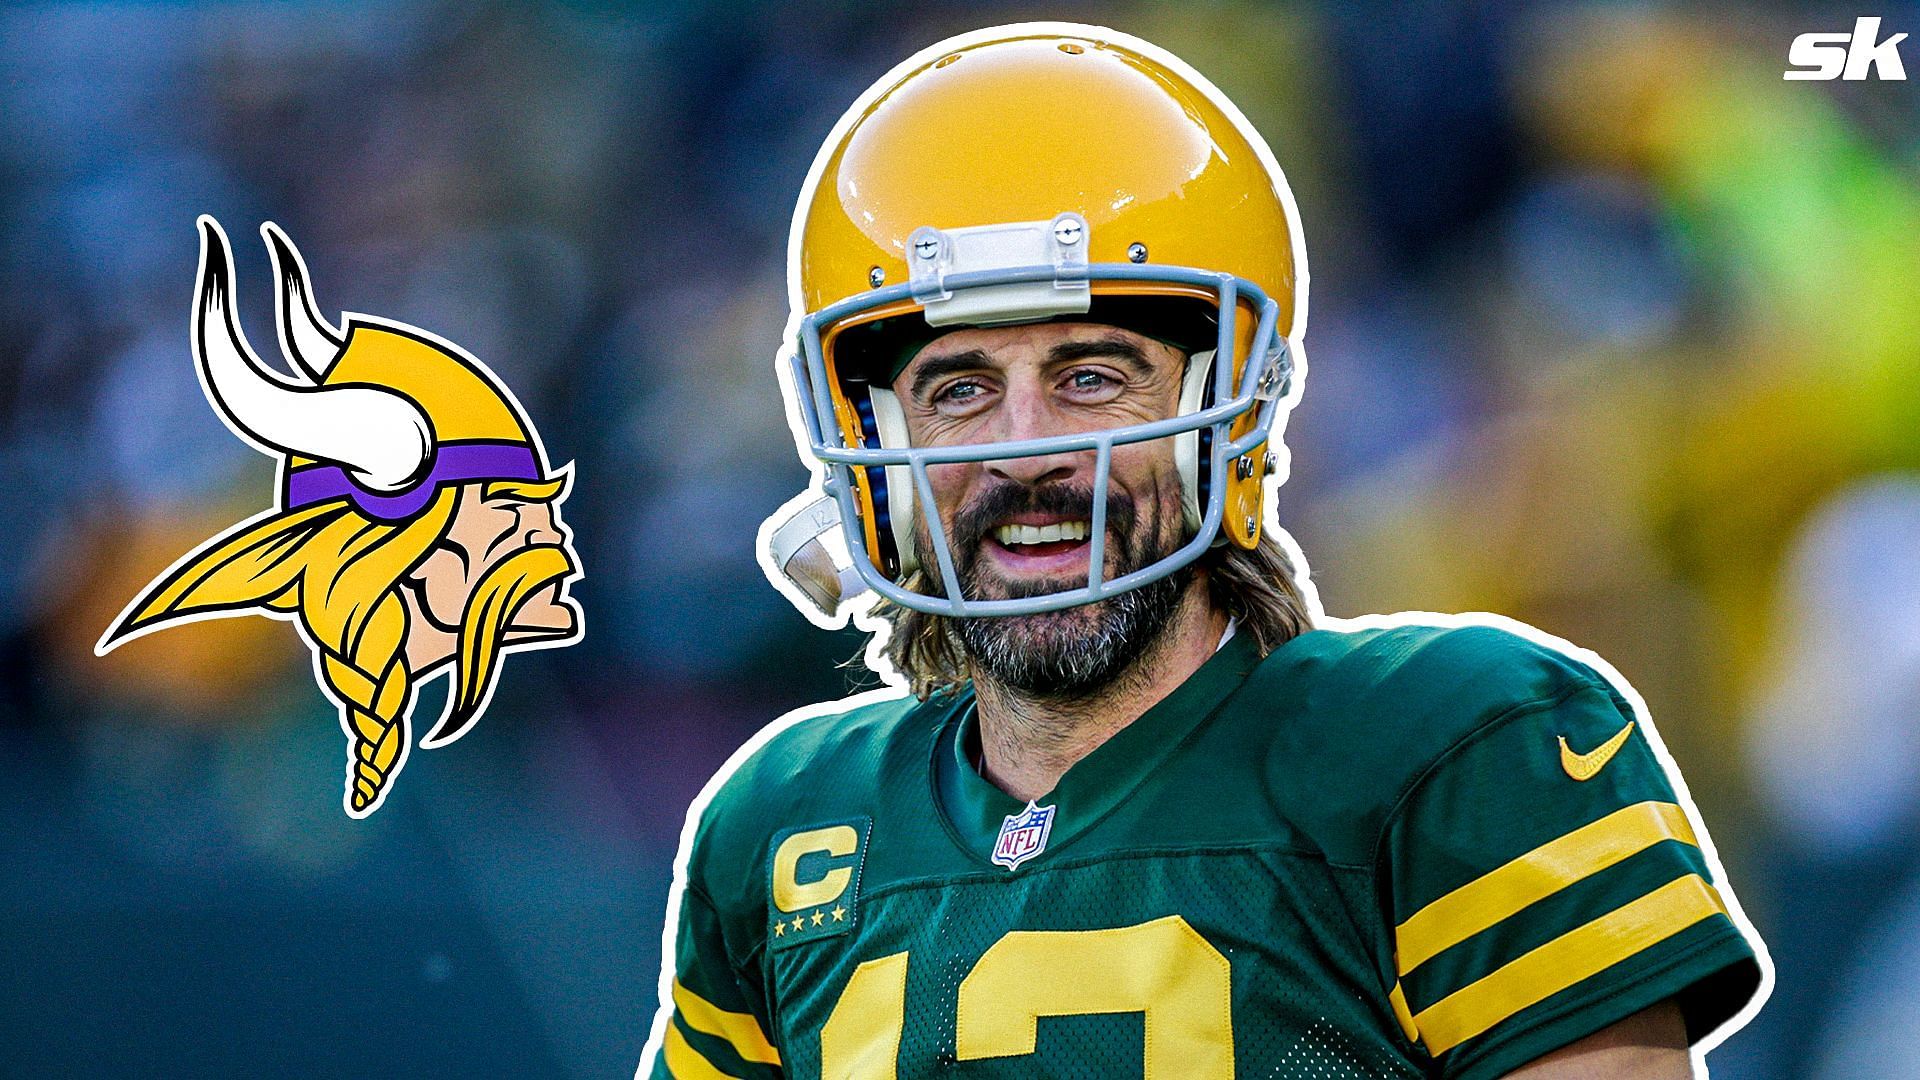 How has QB Aaron Rodgers fared against the Vikings?